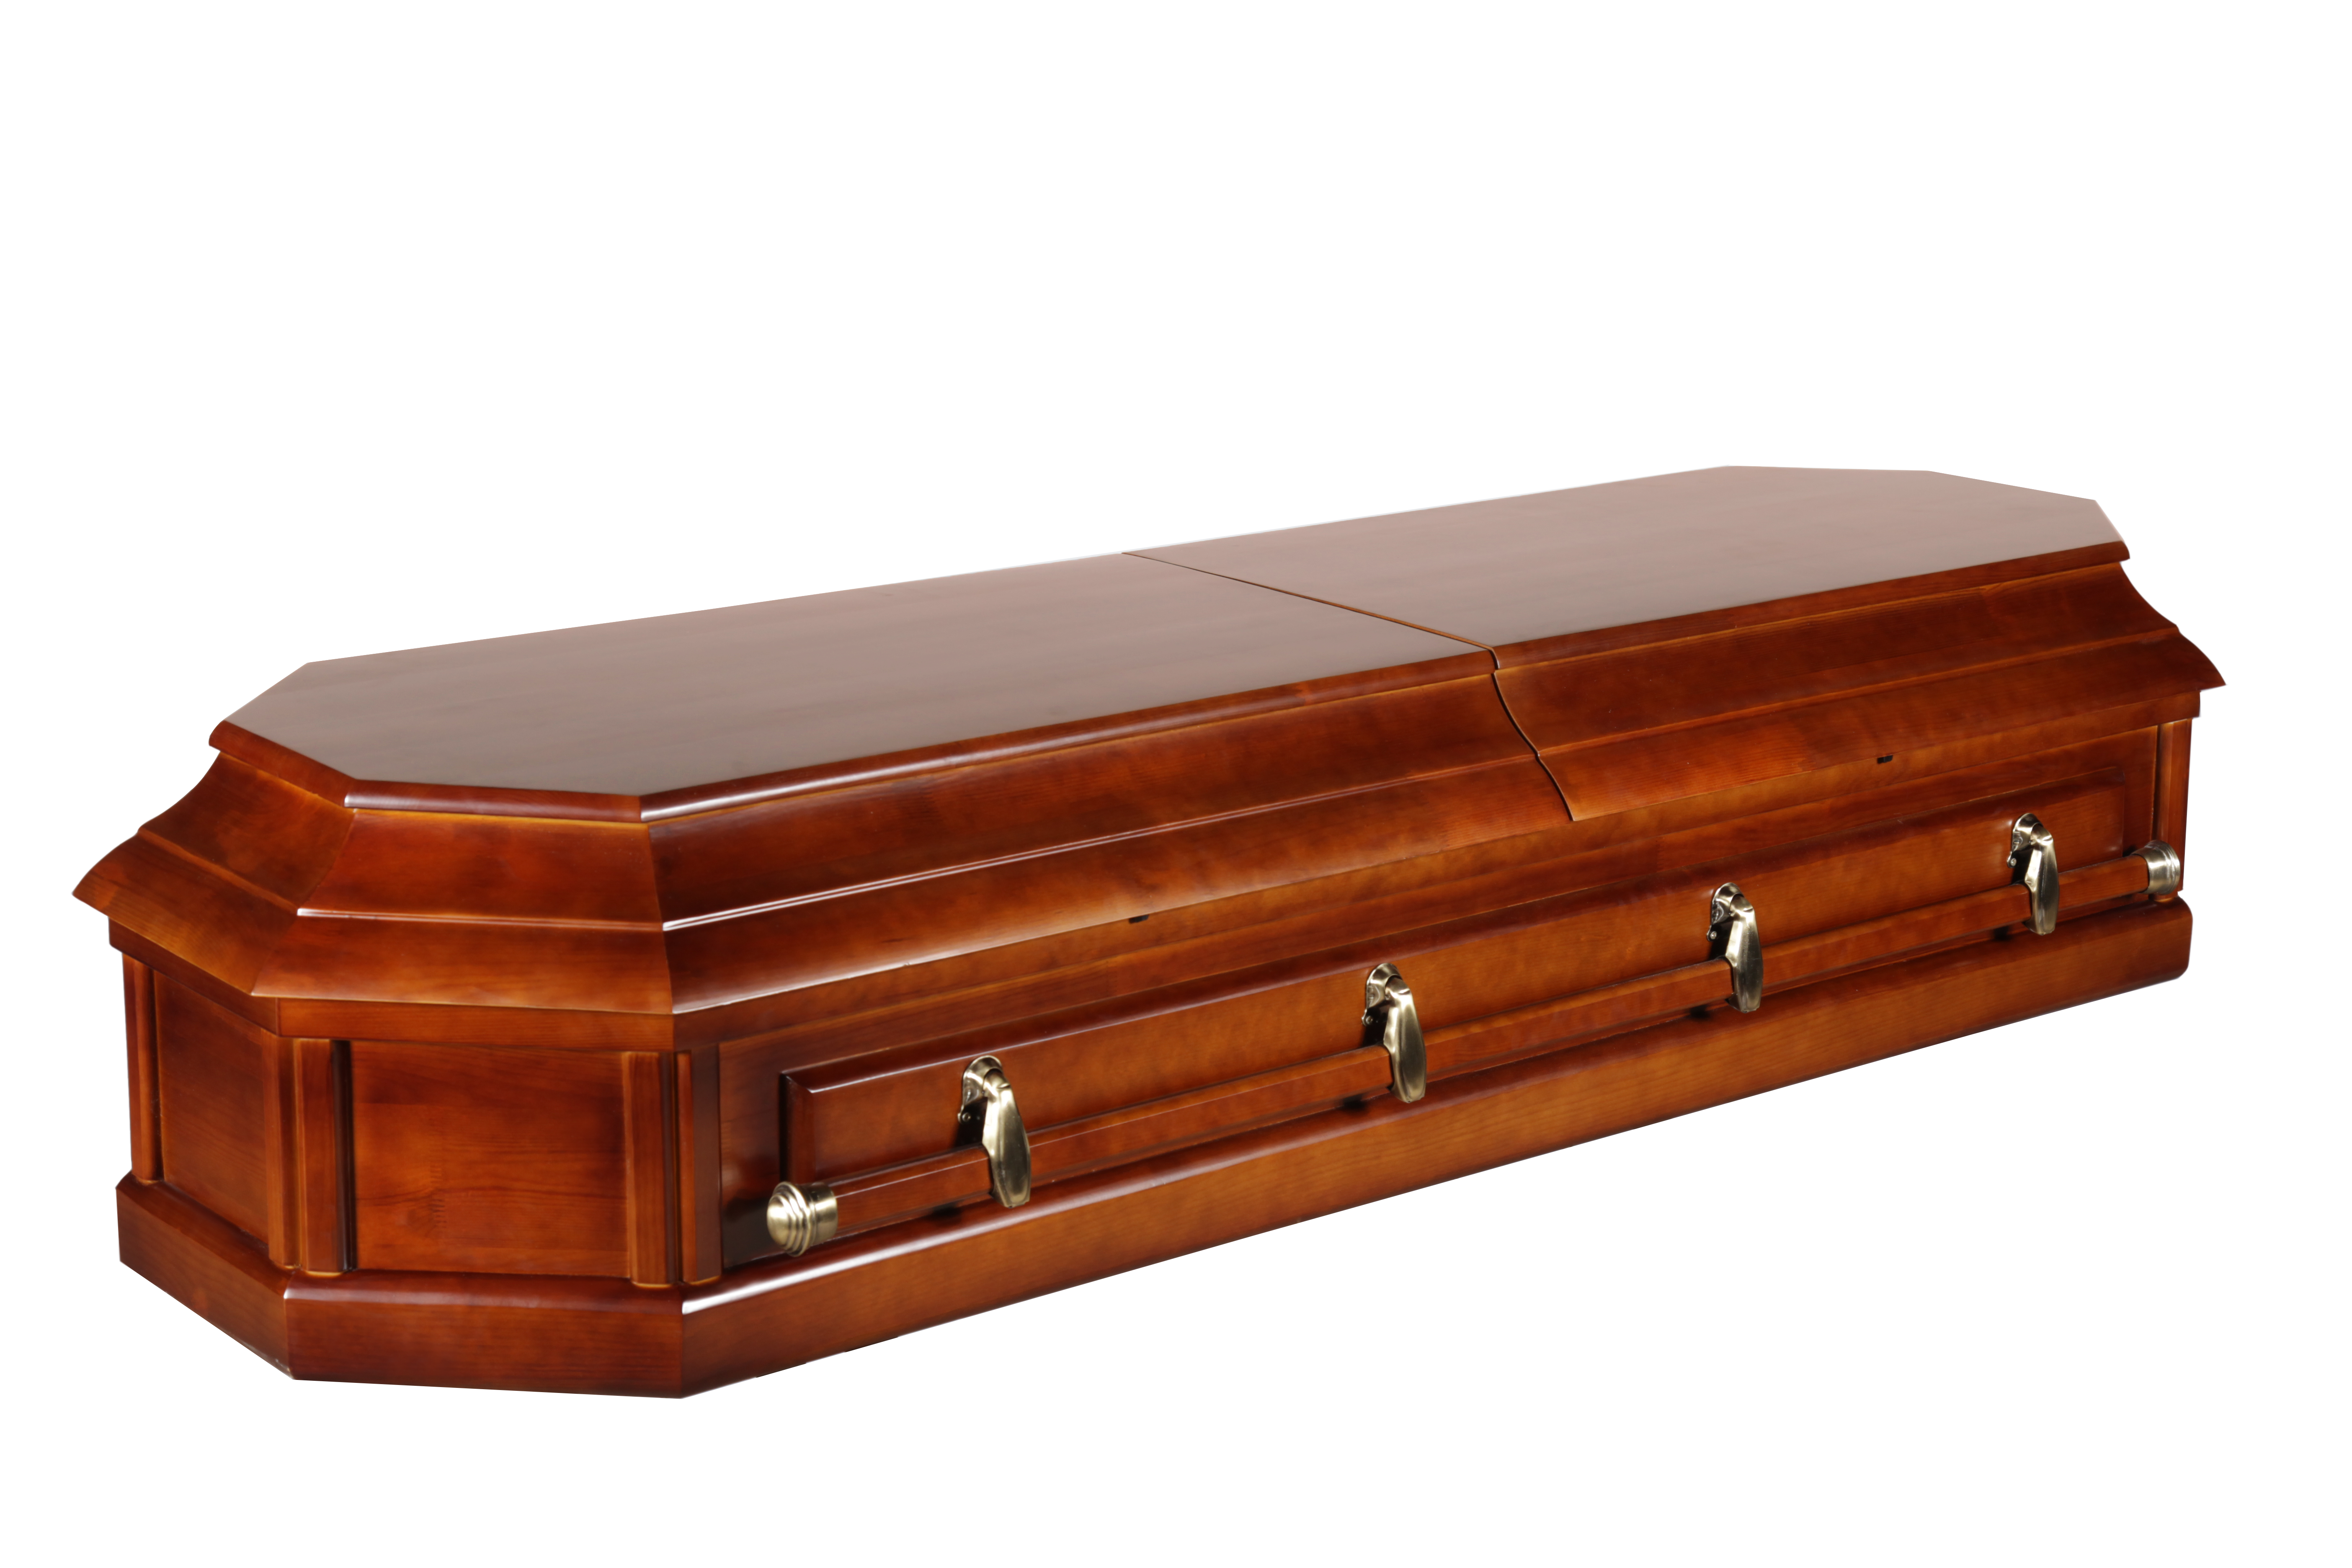 Wooden Coffin Download Free Image PNG Image